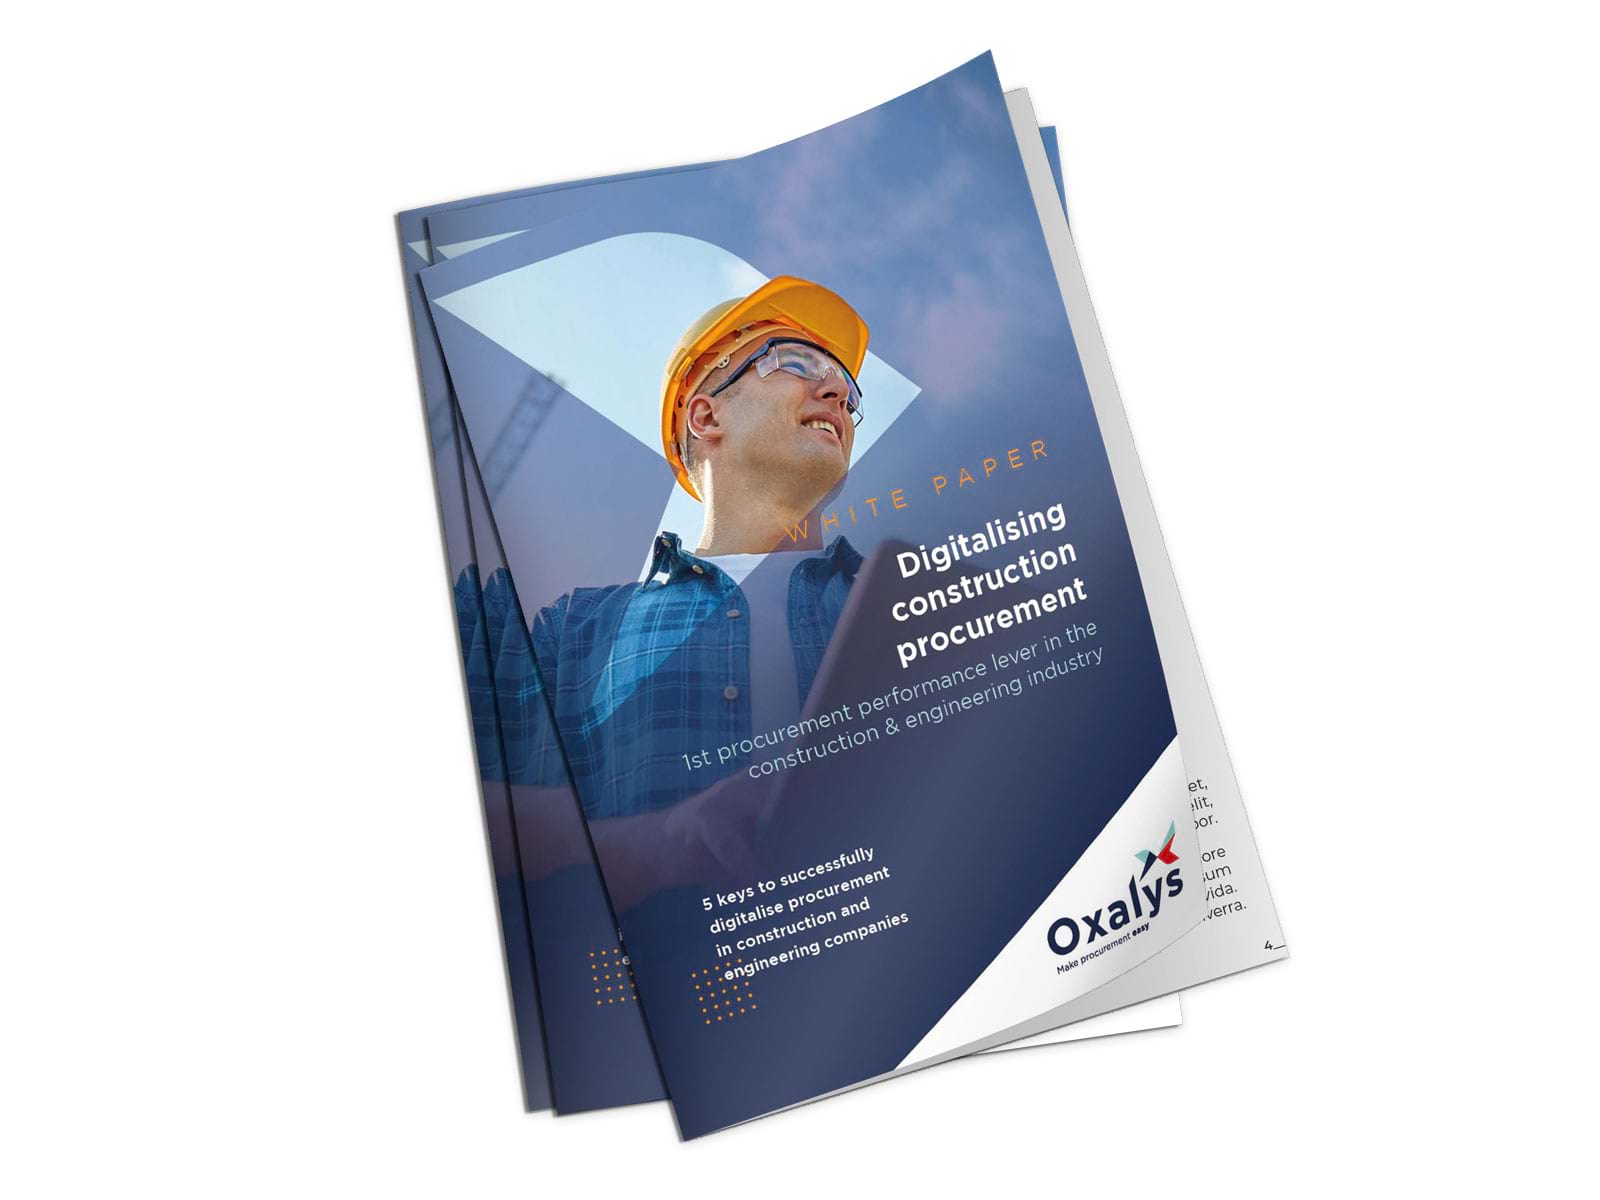 5 keys to successfully digitalise procurement in construction and engineering companies